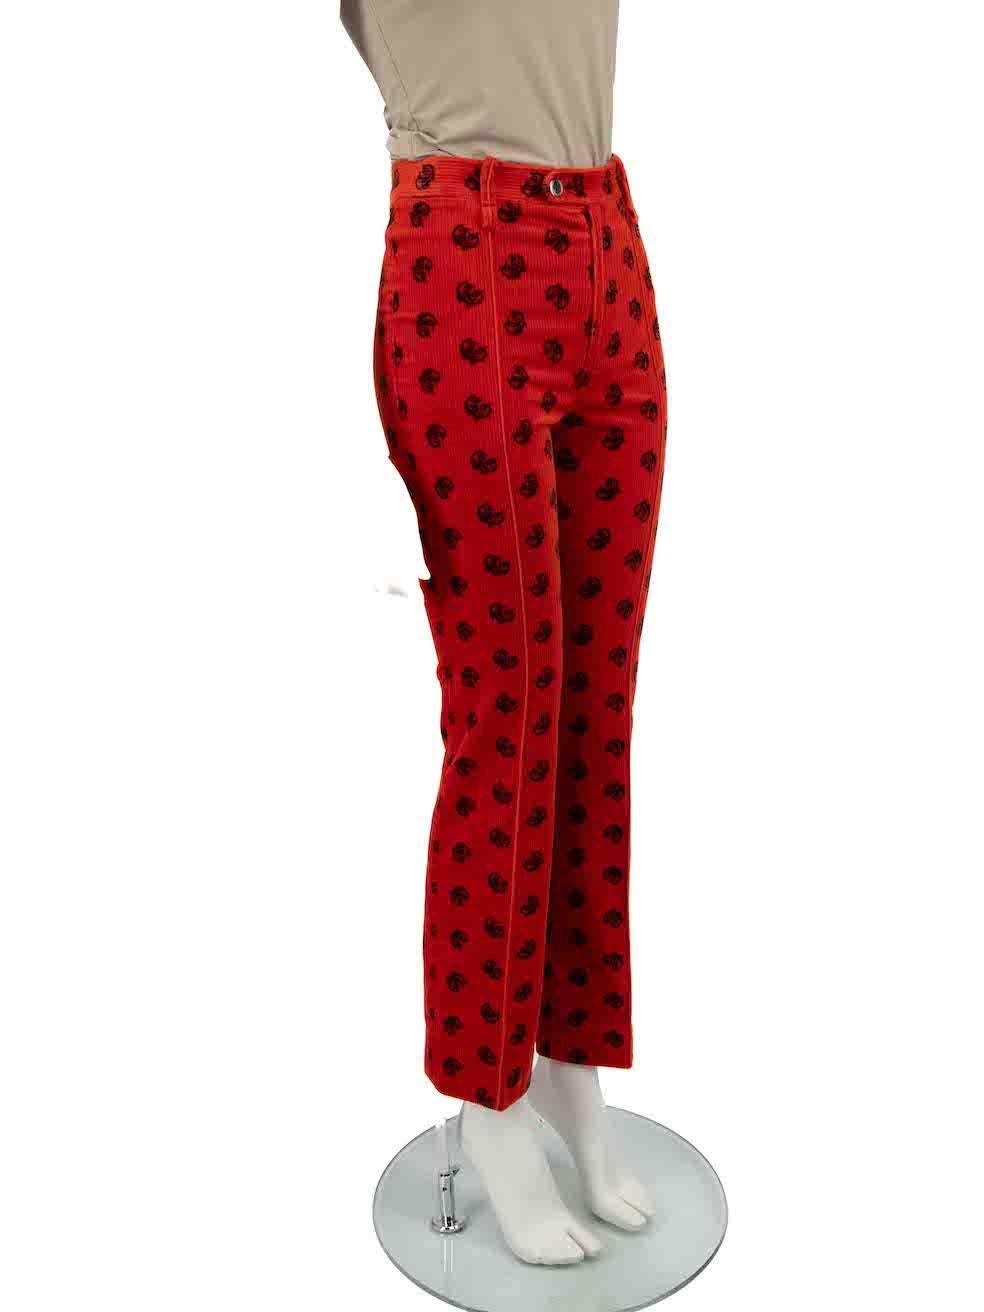 CONDITION is Very good. Hardly any visible wear to trousers is evident on this used Chloé designer resale item.
 
 
 
 Details
 
 
 Red
 
 Corduroy
 
 Trousers
 
 Straight leg
 
 High rise
 
 Heart print
 
 Fly zip and button fastening
 
 
 
 
 
